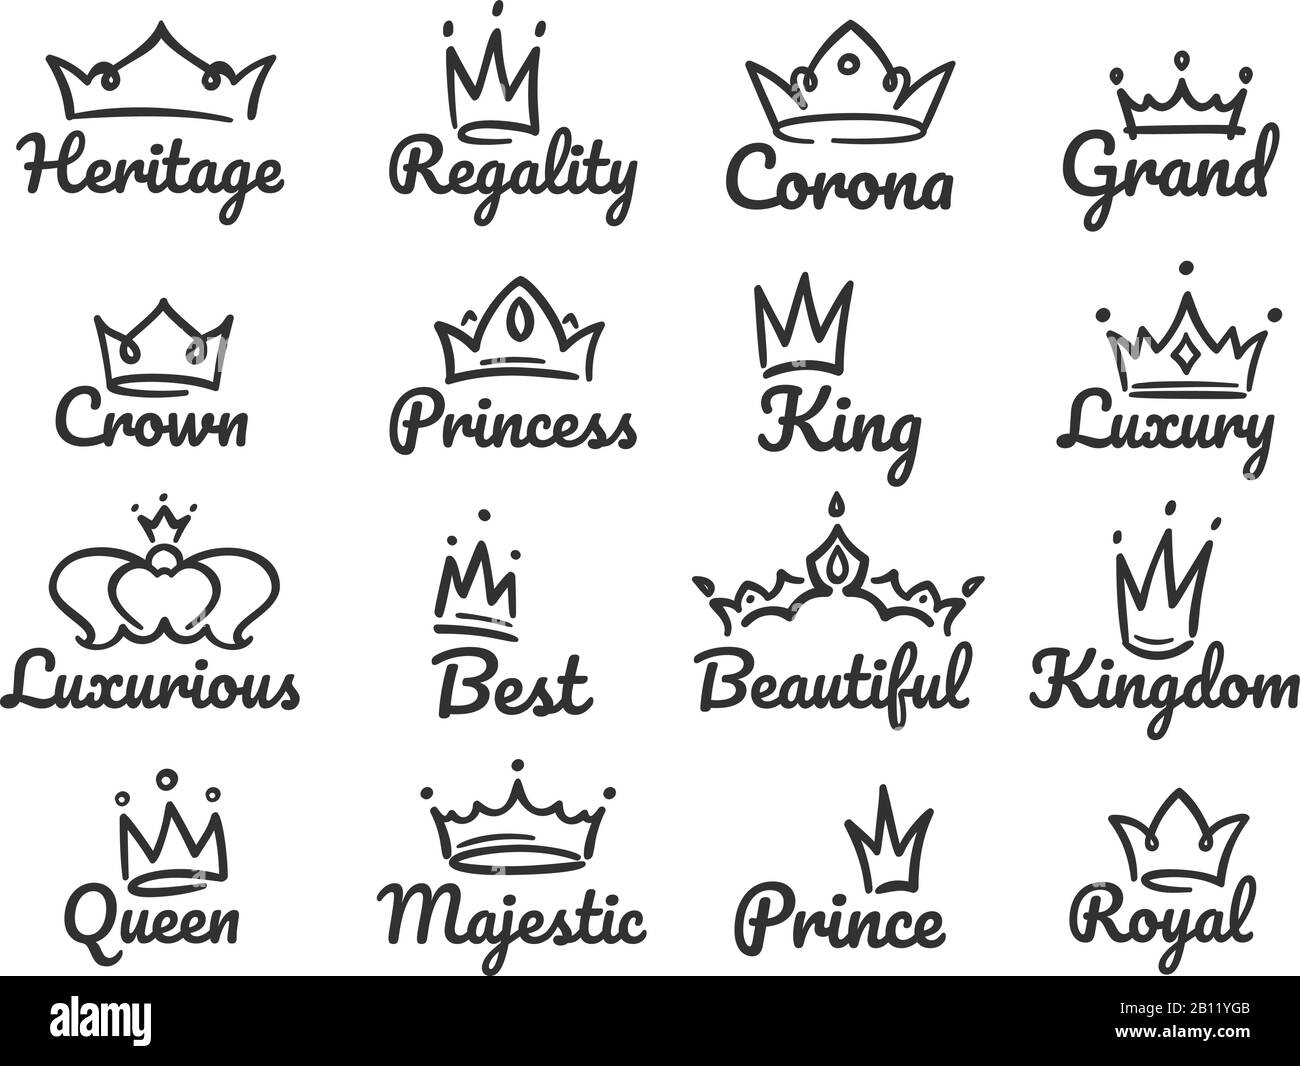 Easy Step For Kids How To Draw a Queen's Crown - YouTube